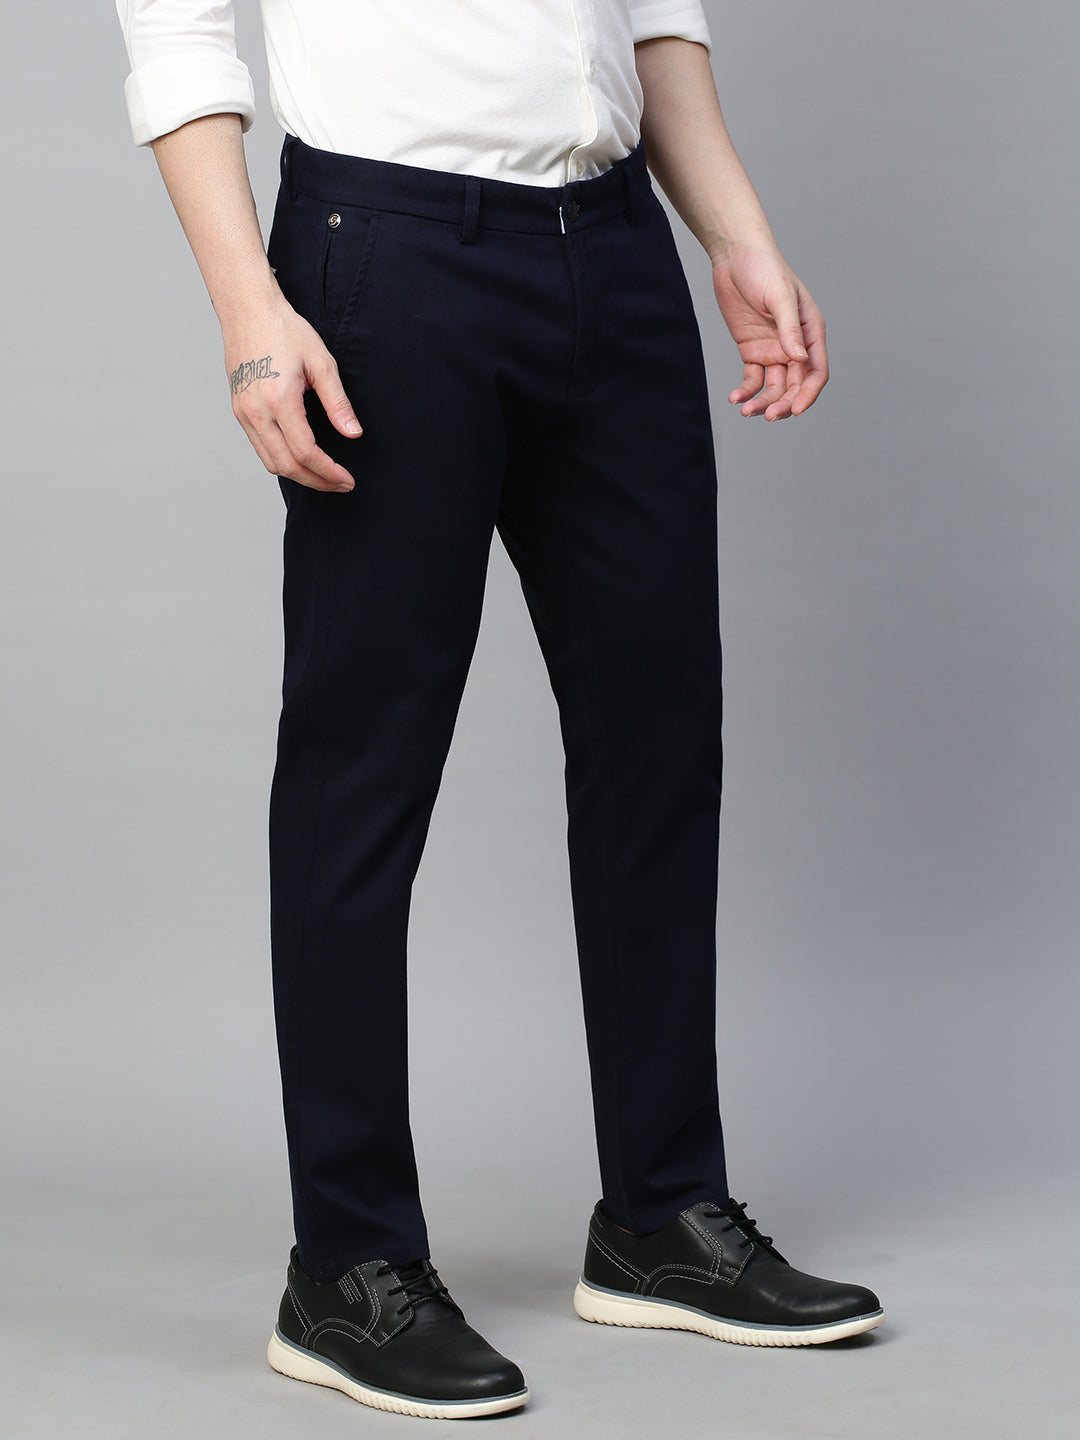 Genips Men's Navy  Cotton Stretch Caribbean Slim Fit Solid Trousers